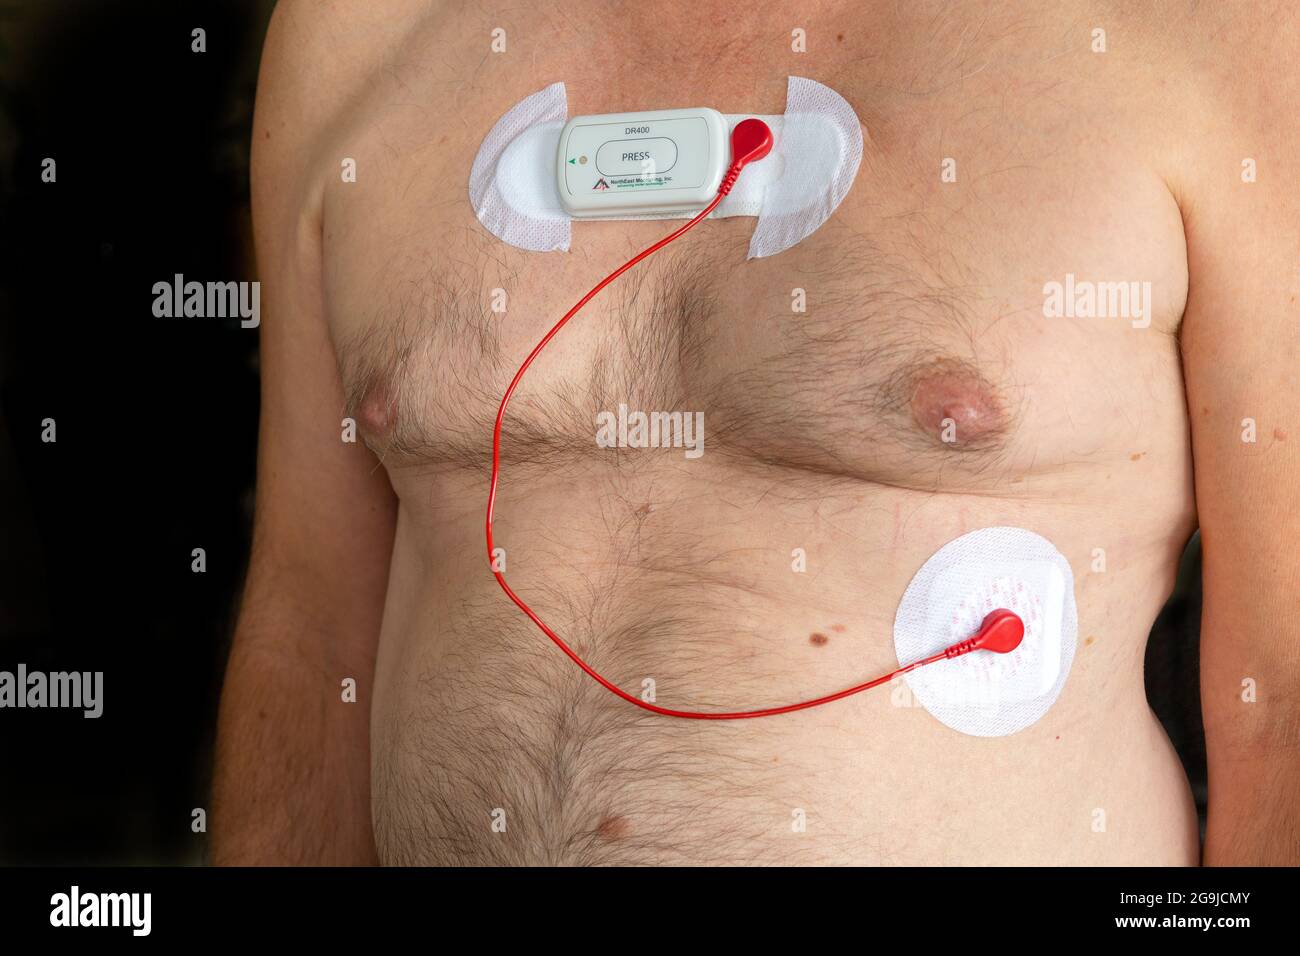 Holter Heart Monitor On A Male Caucasian Patients Chest To Record Electrical Activity of The Heart For Up To 72 Hours, Myocarditis Stock Photo